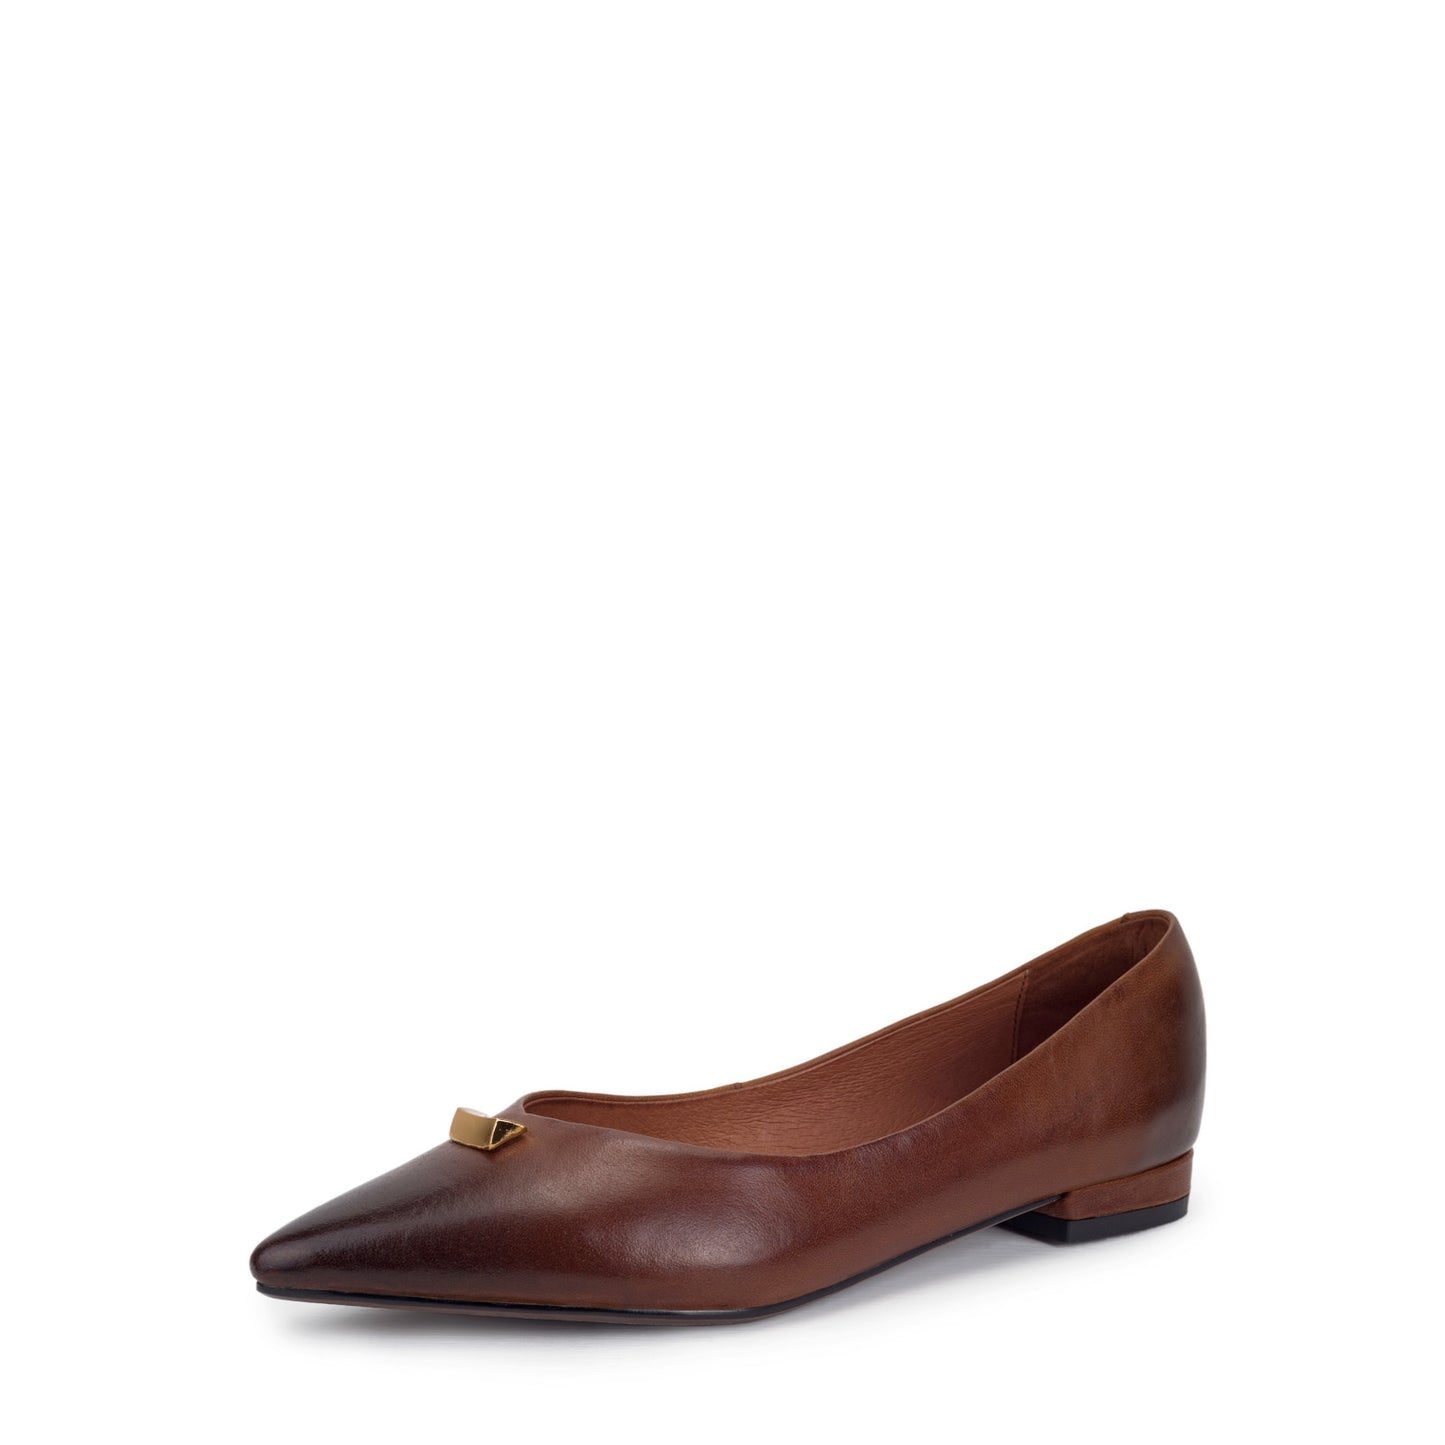 Sava-Brown-Leather-Ballet-Flat-Shoes